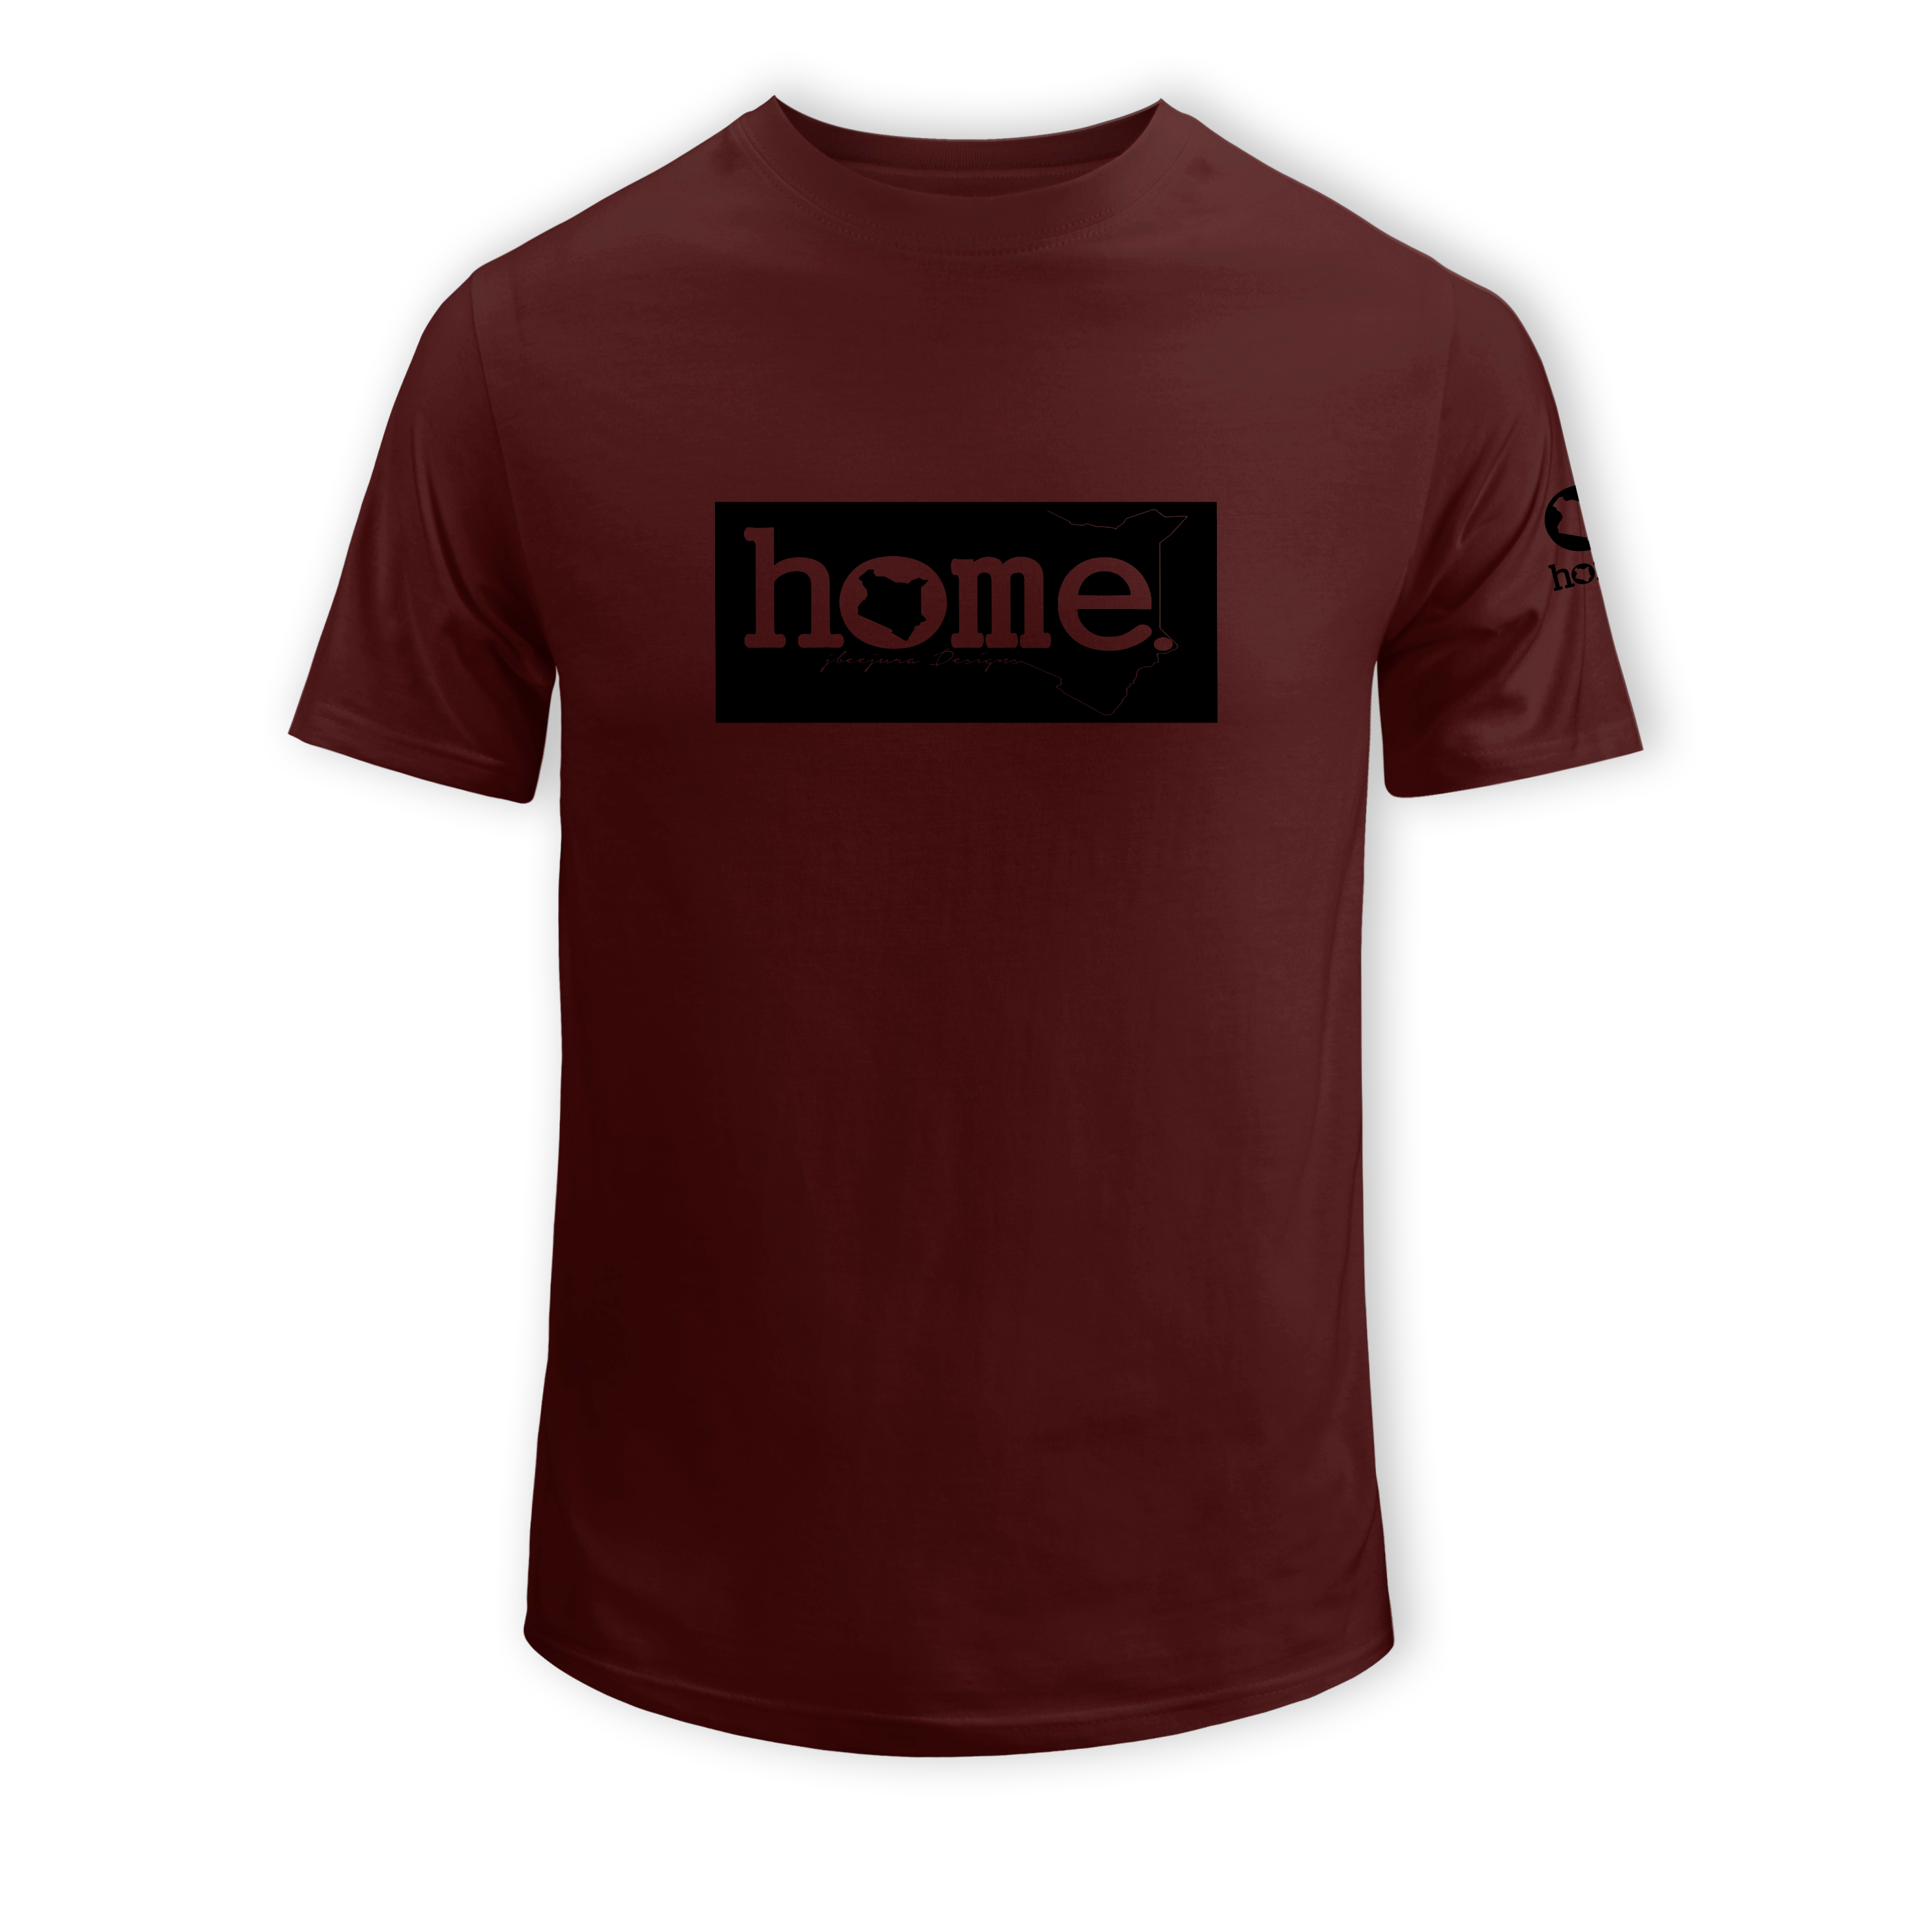 home_254 SHORT-SLEEVED MAROON T-SHIRT WITH A BLACK CLASSIC PRINT – COTTON PLUS FABRIC